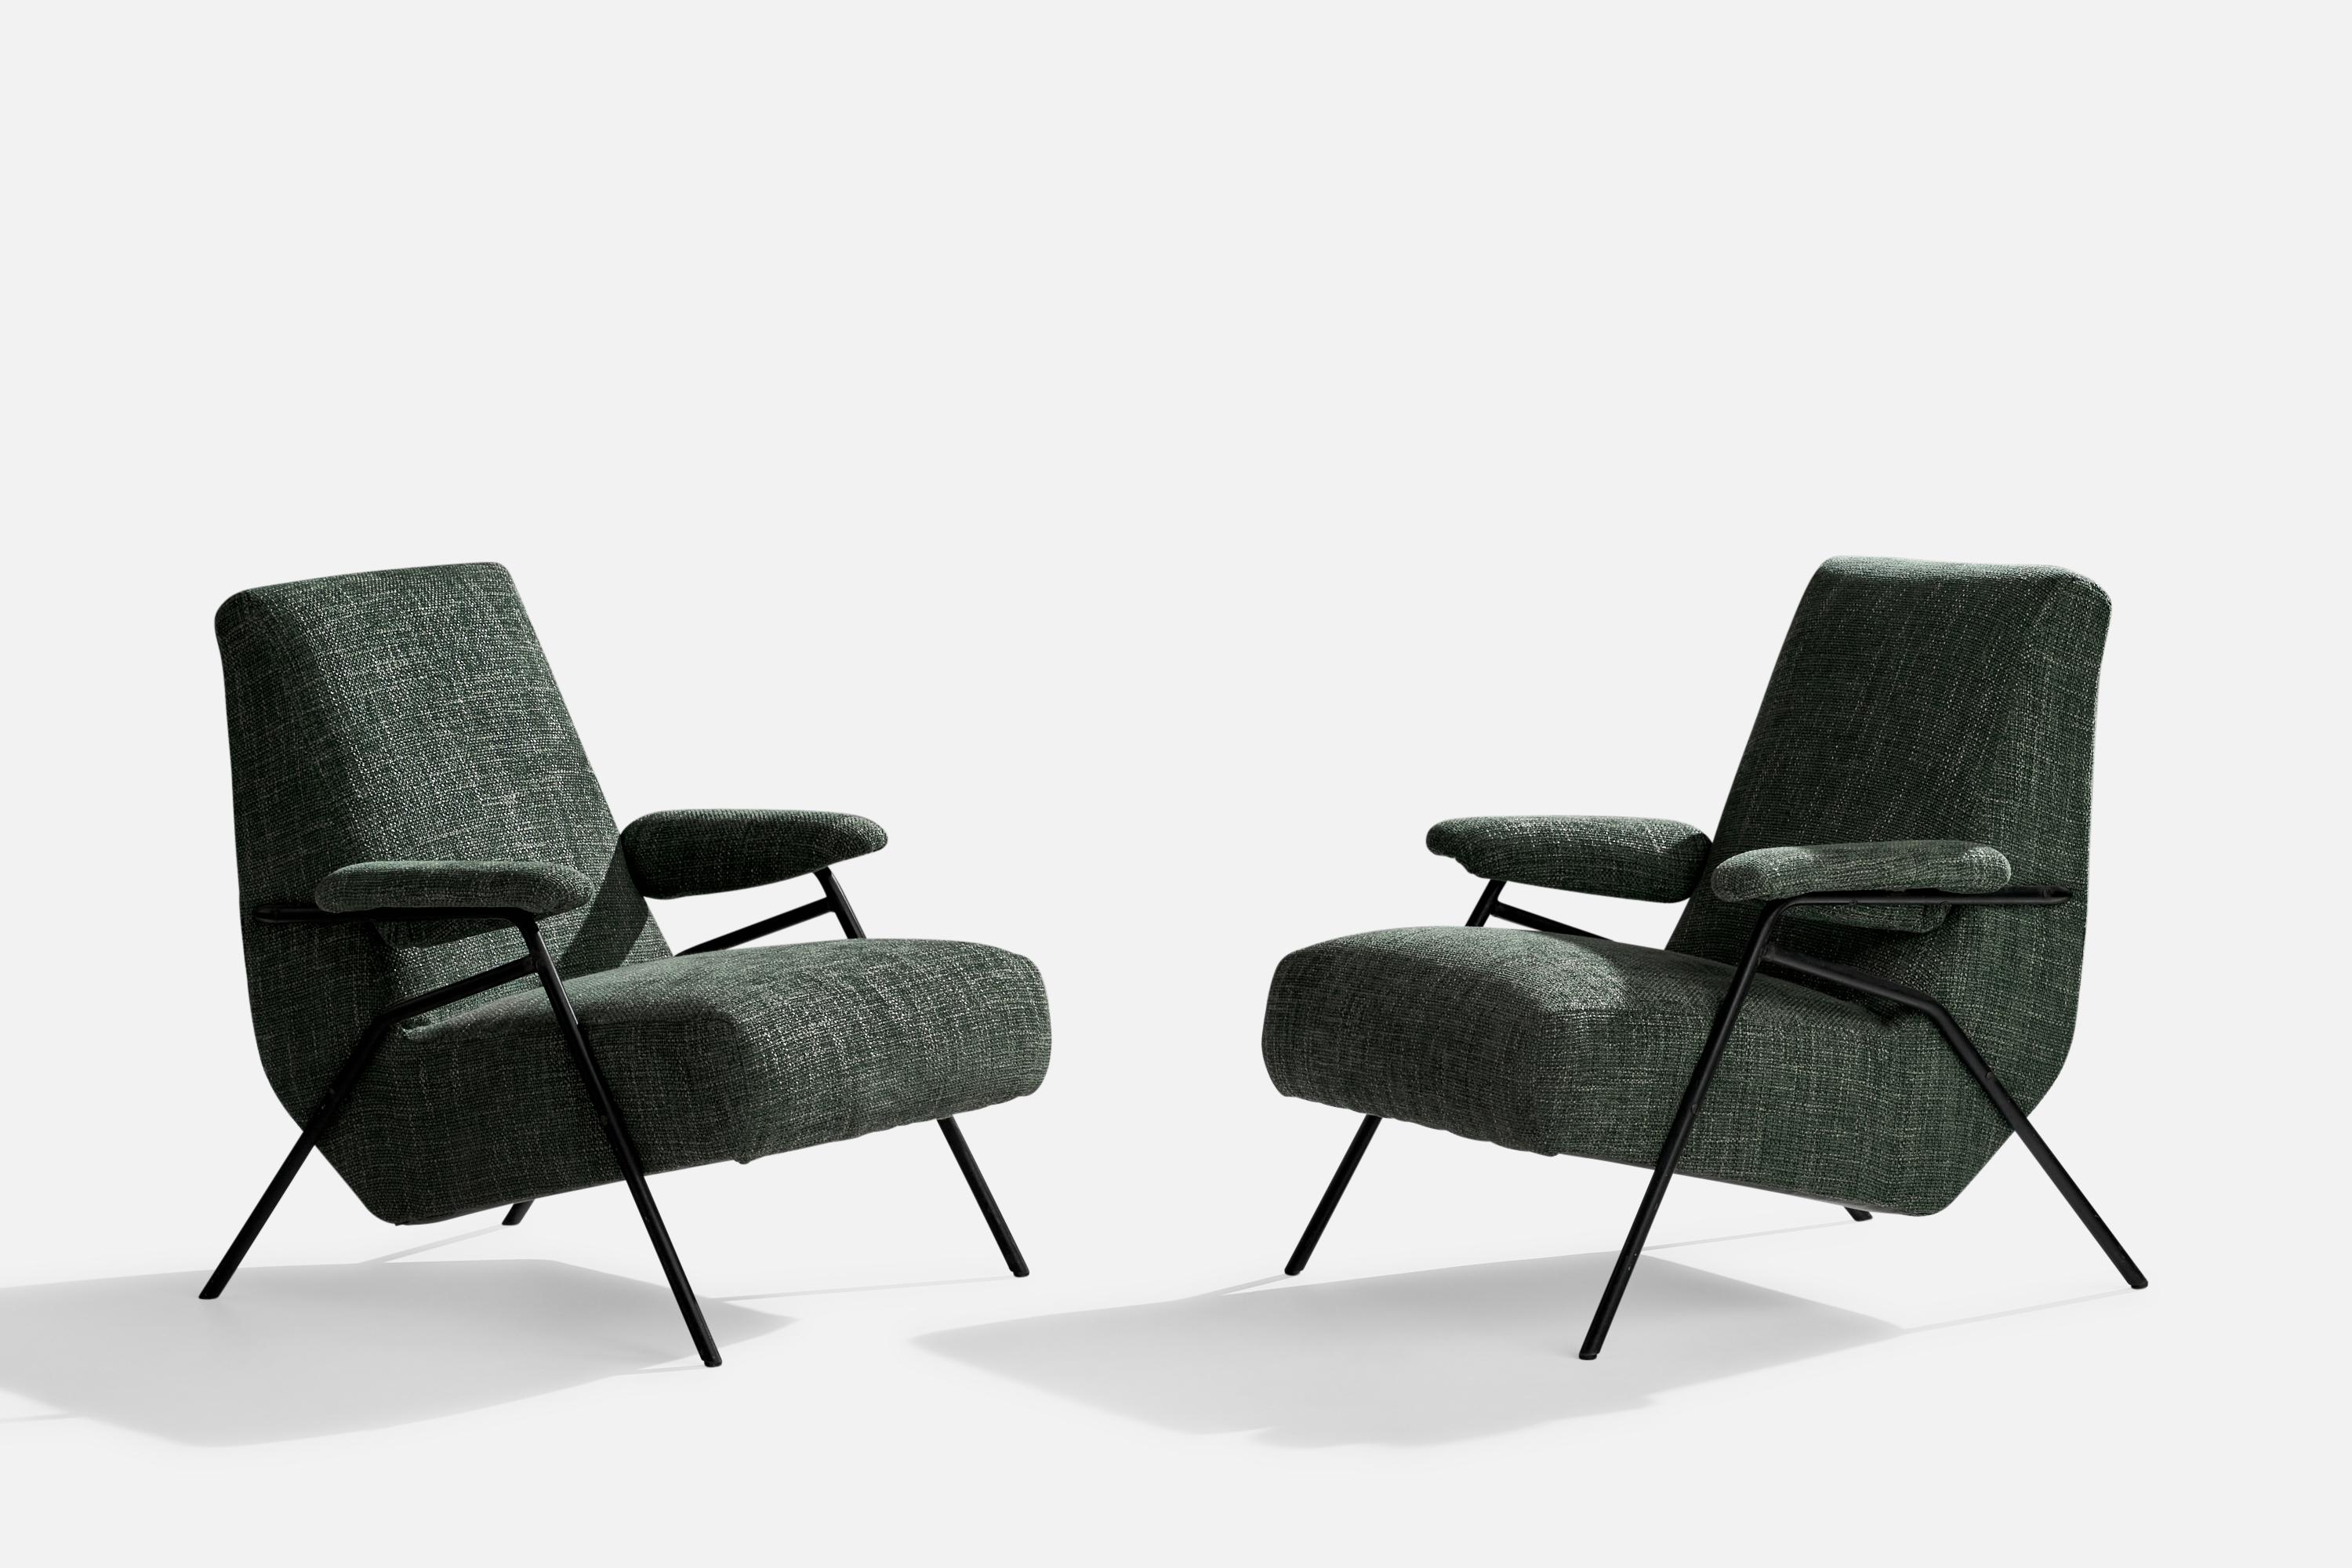 A pair of black-painted iron and green fabric lounge chairs designed and produced in Italy, 1950s.

Seat height 14.97”

